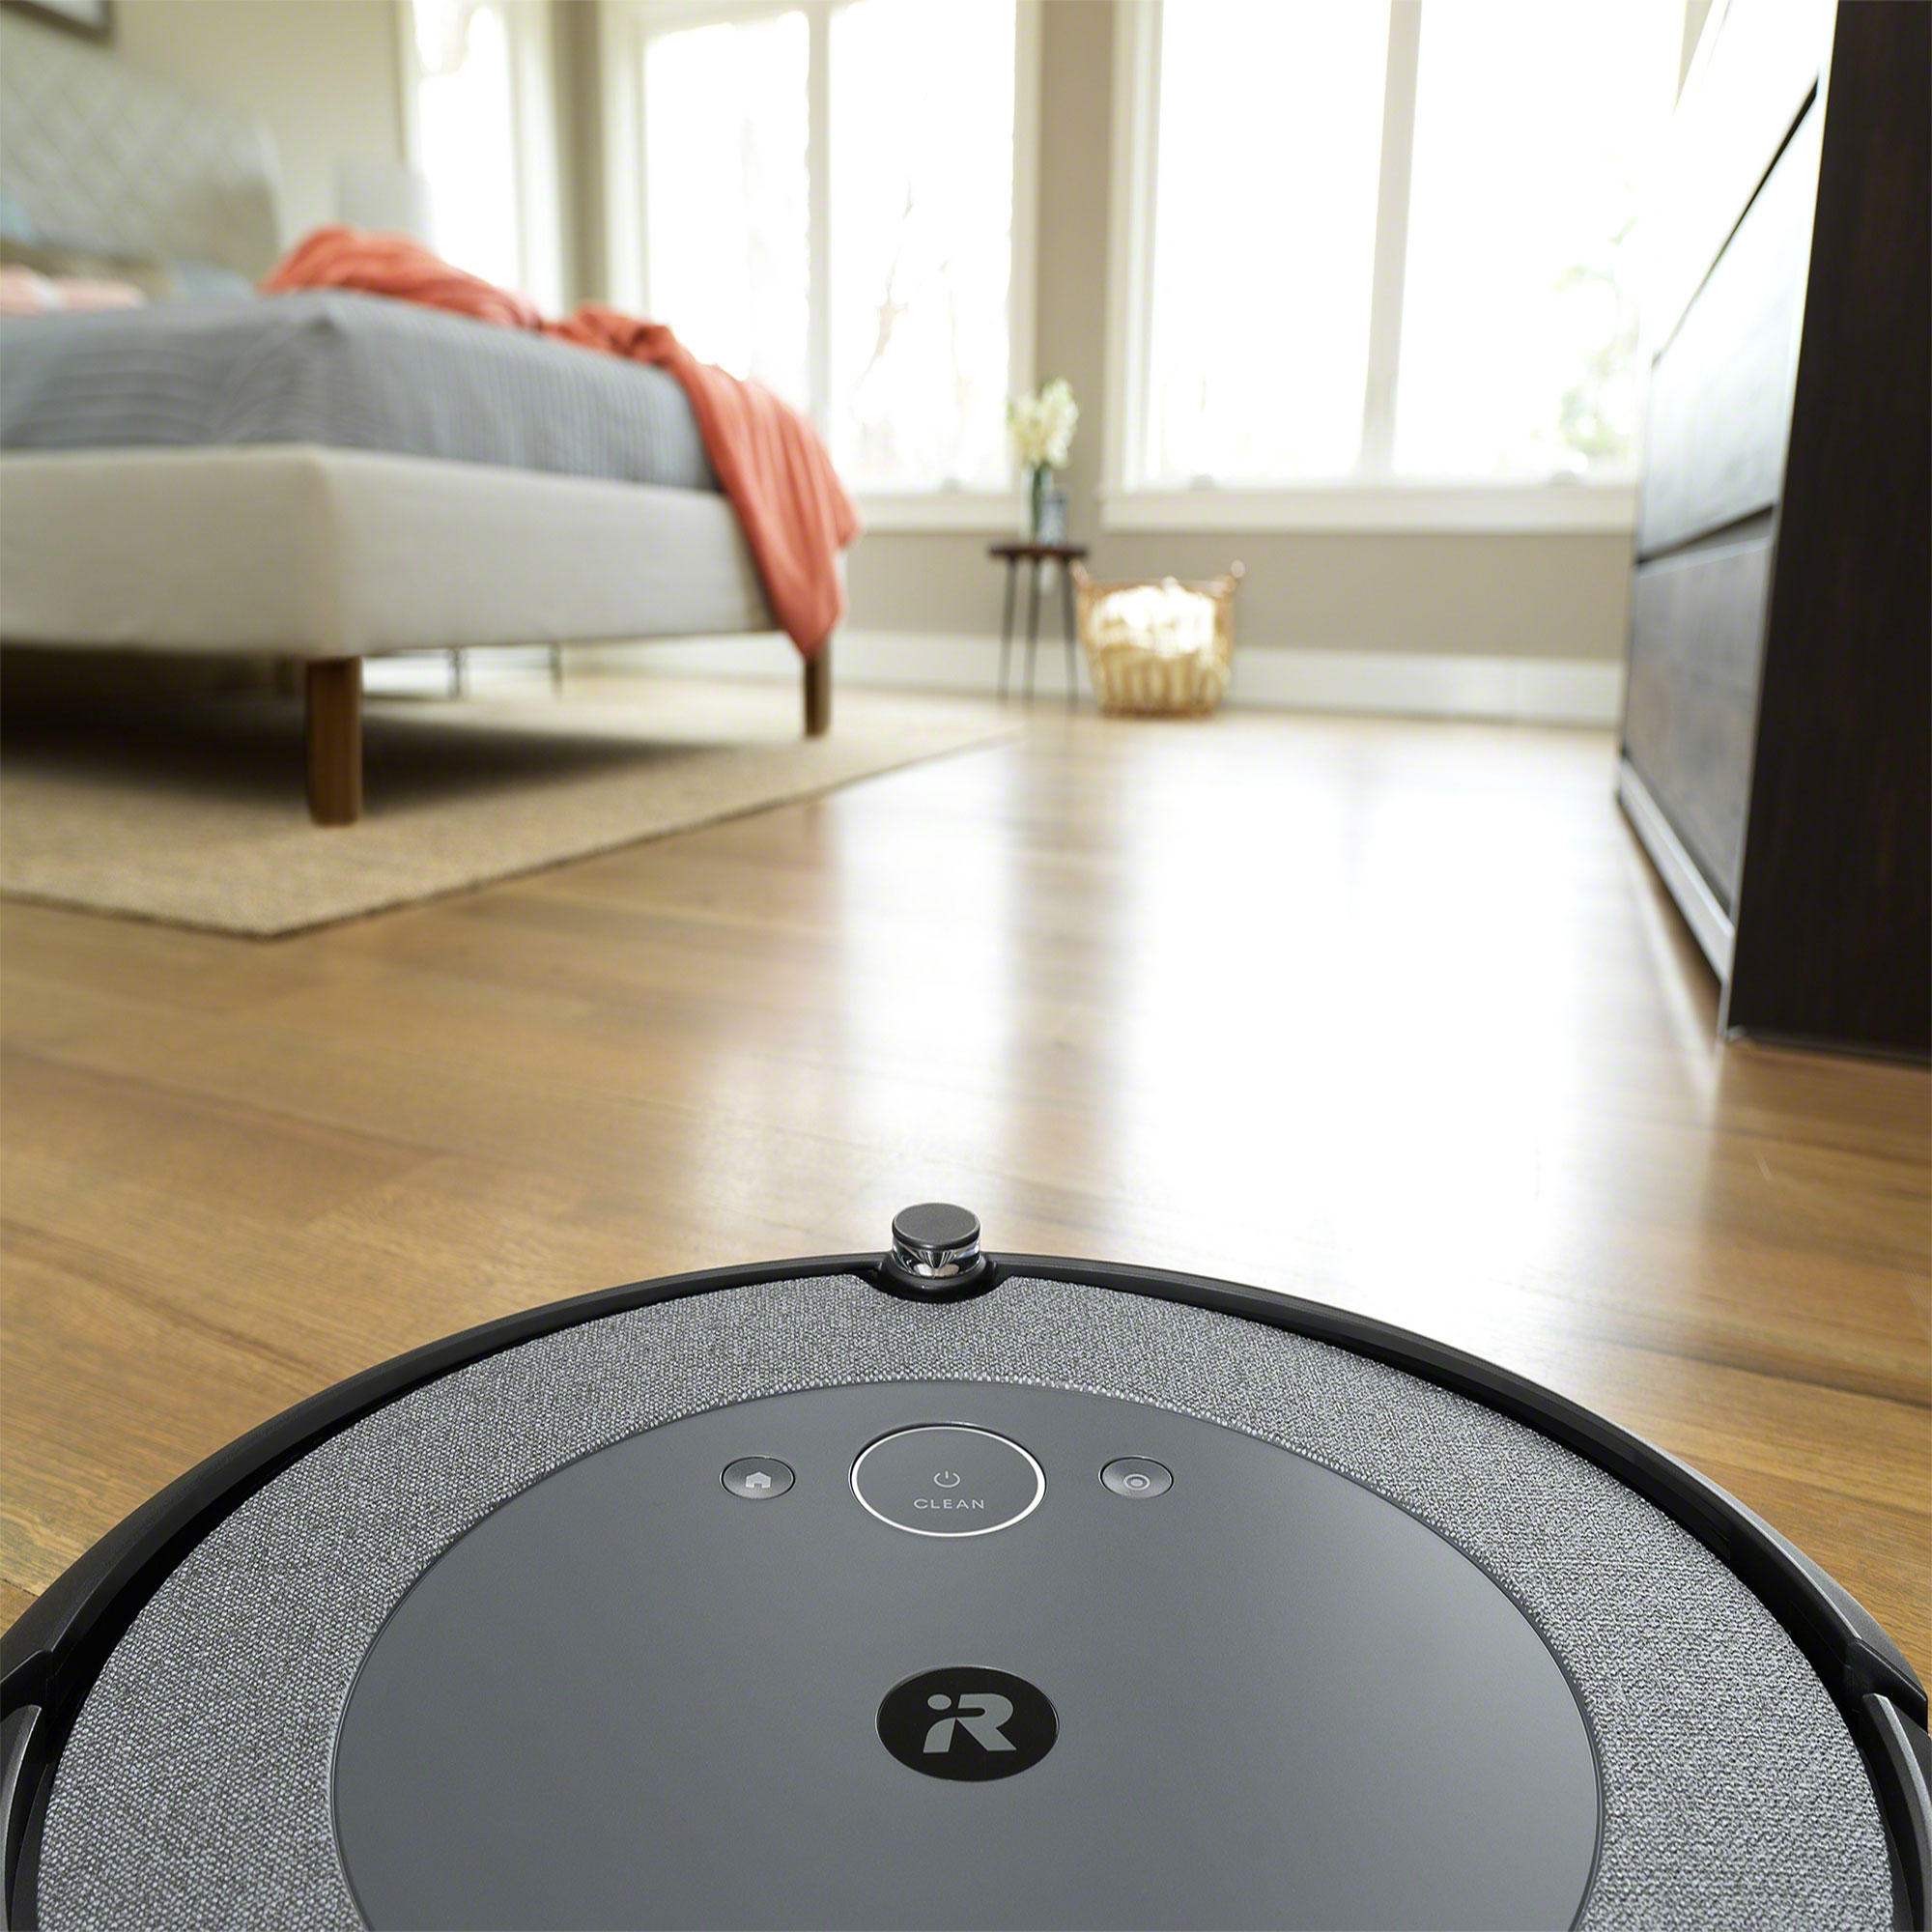 The iRobot Roomba i3+ brings a thoughtful new design that fits well into consumers’ homes, with a durable, woven texture that minimizes fingerprints and collects less dust.